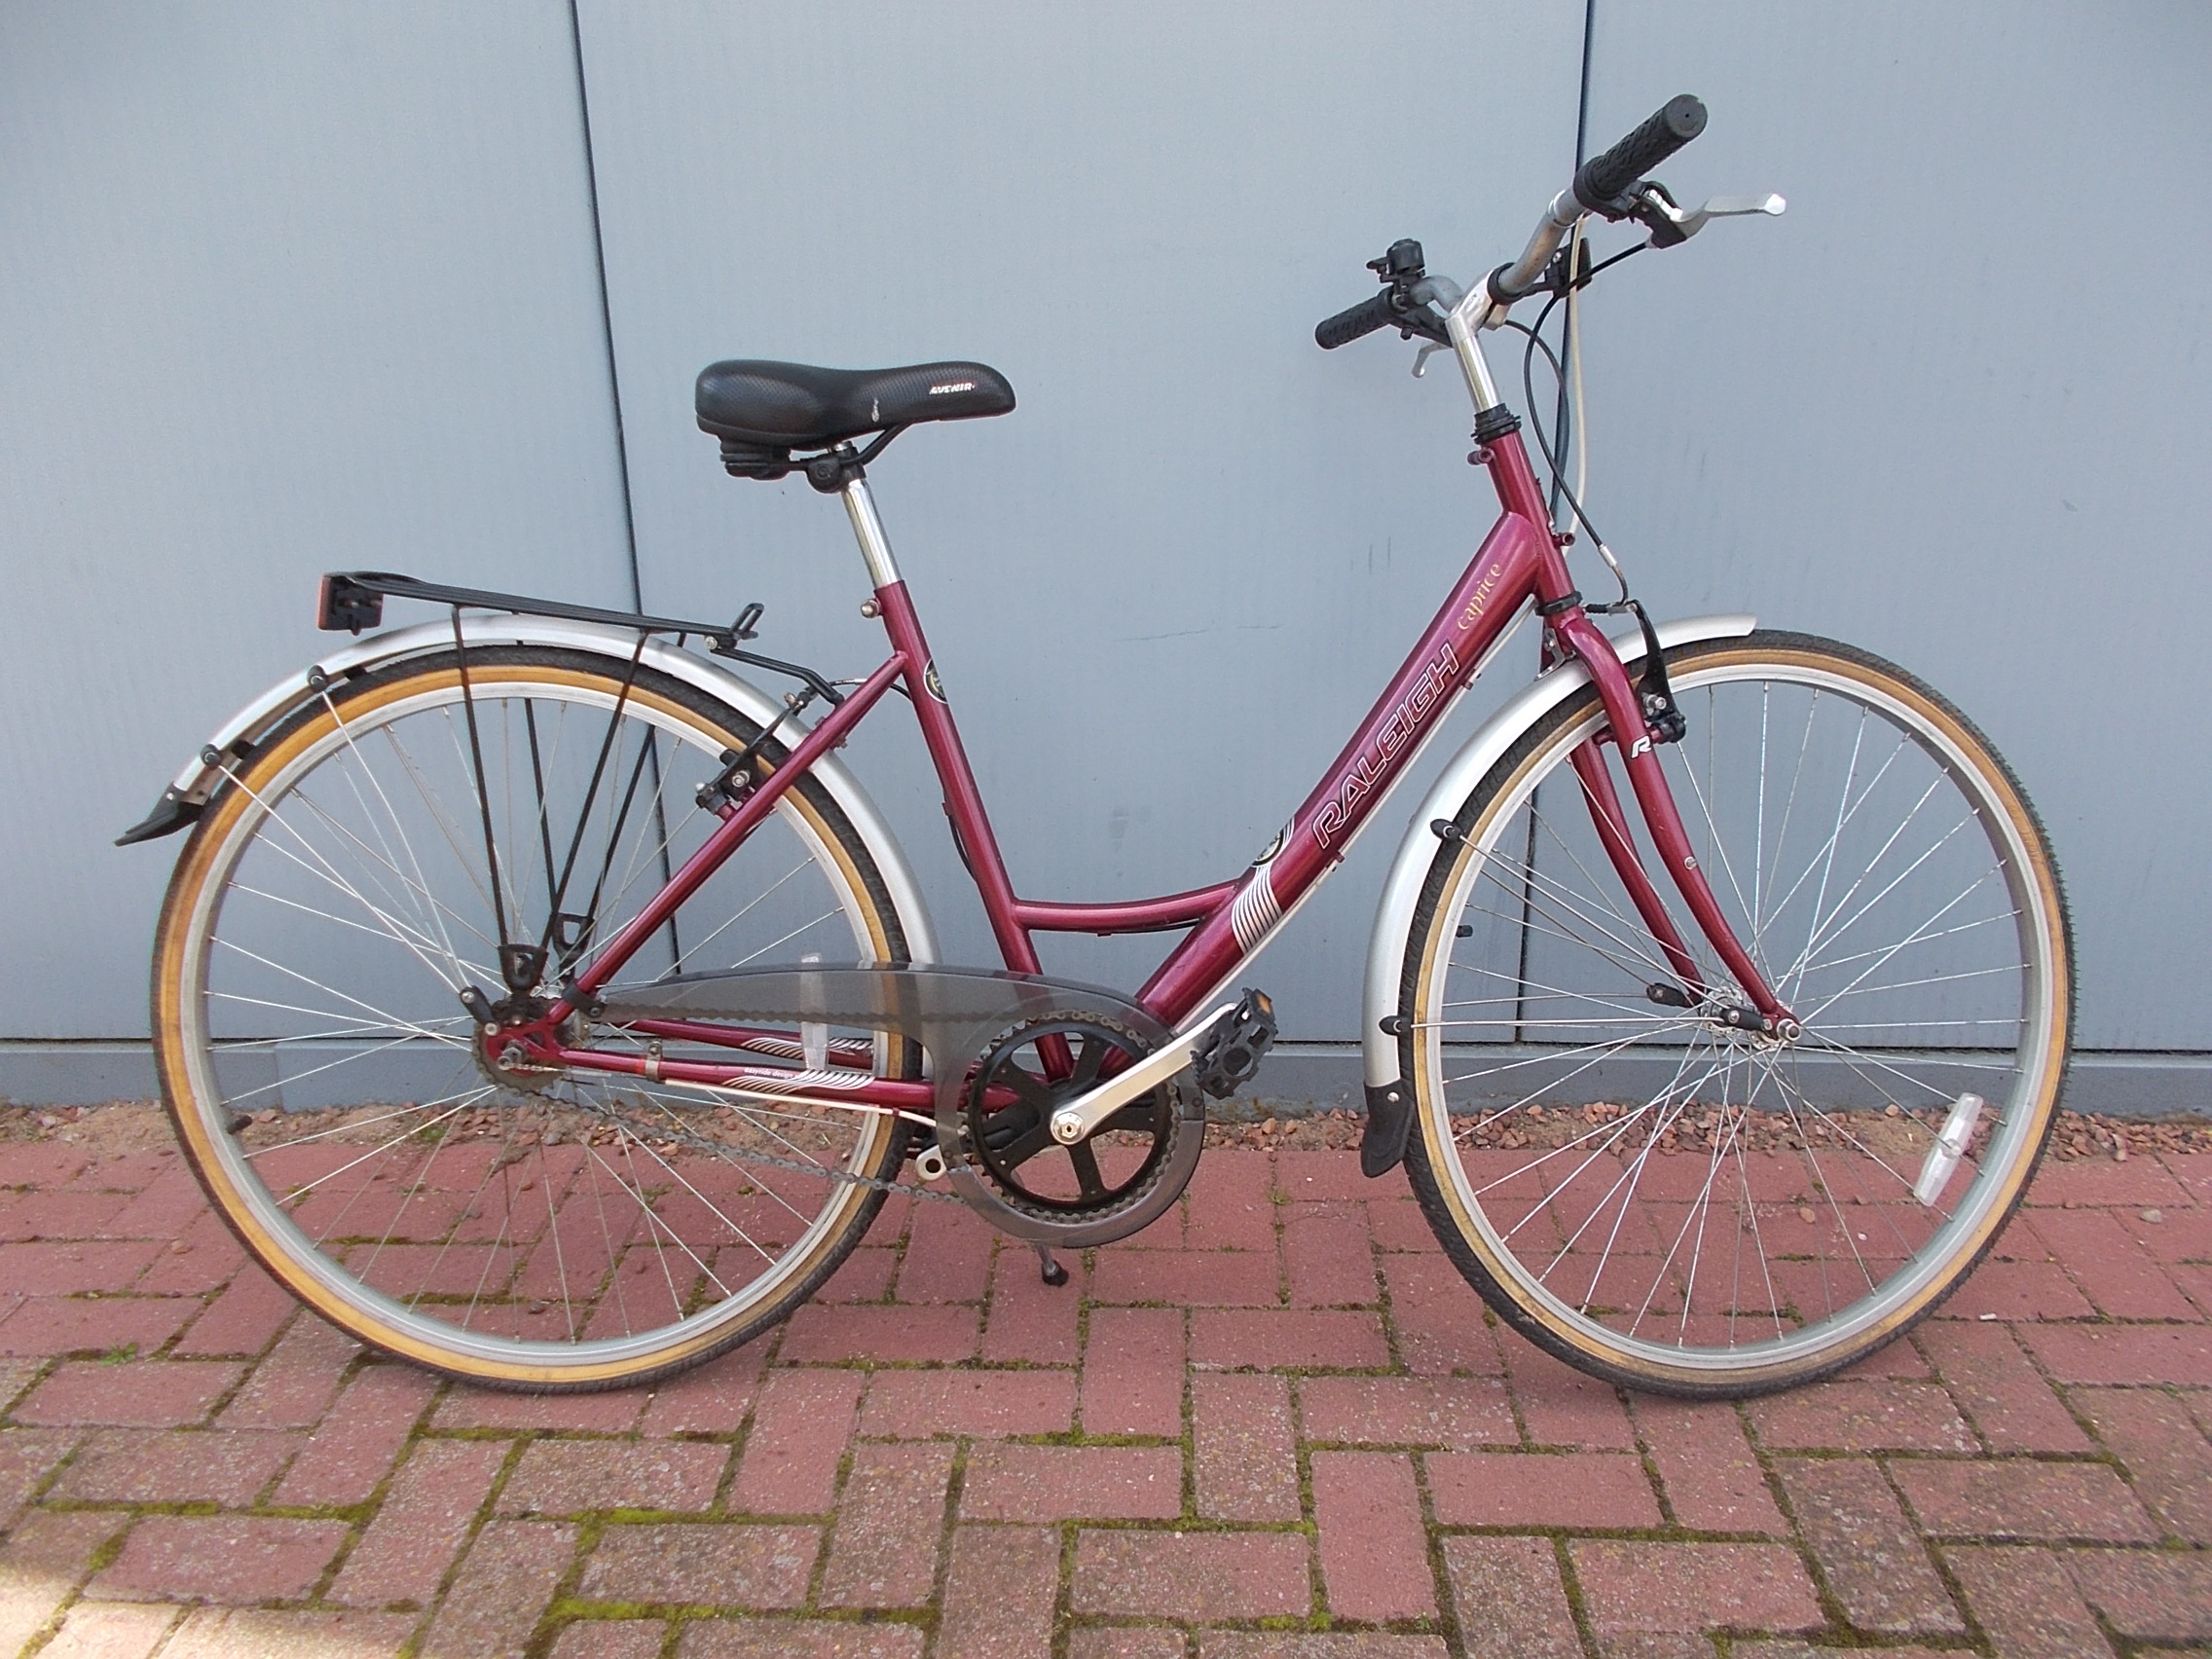 Raleigh Caprice 19.25" Bicycle